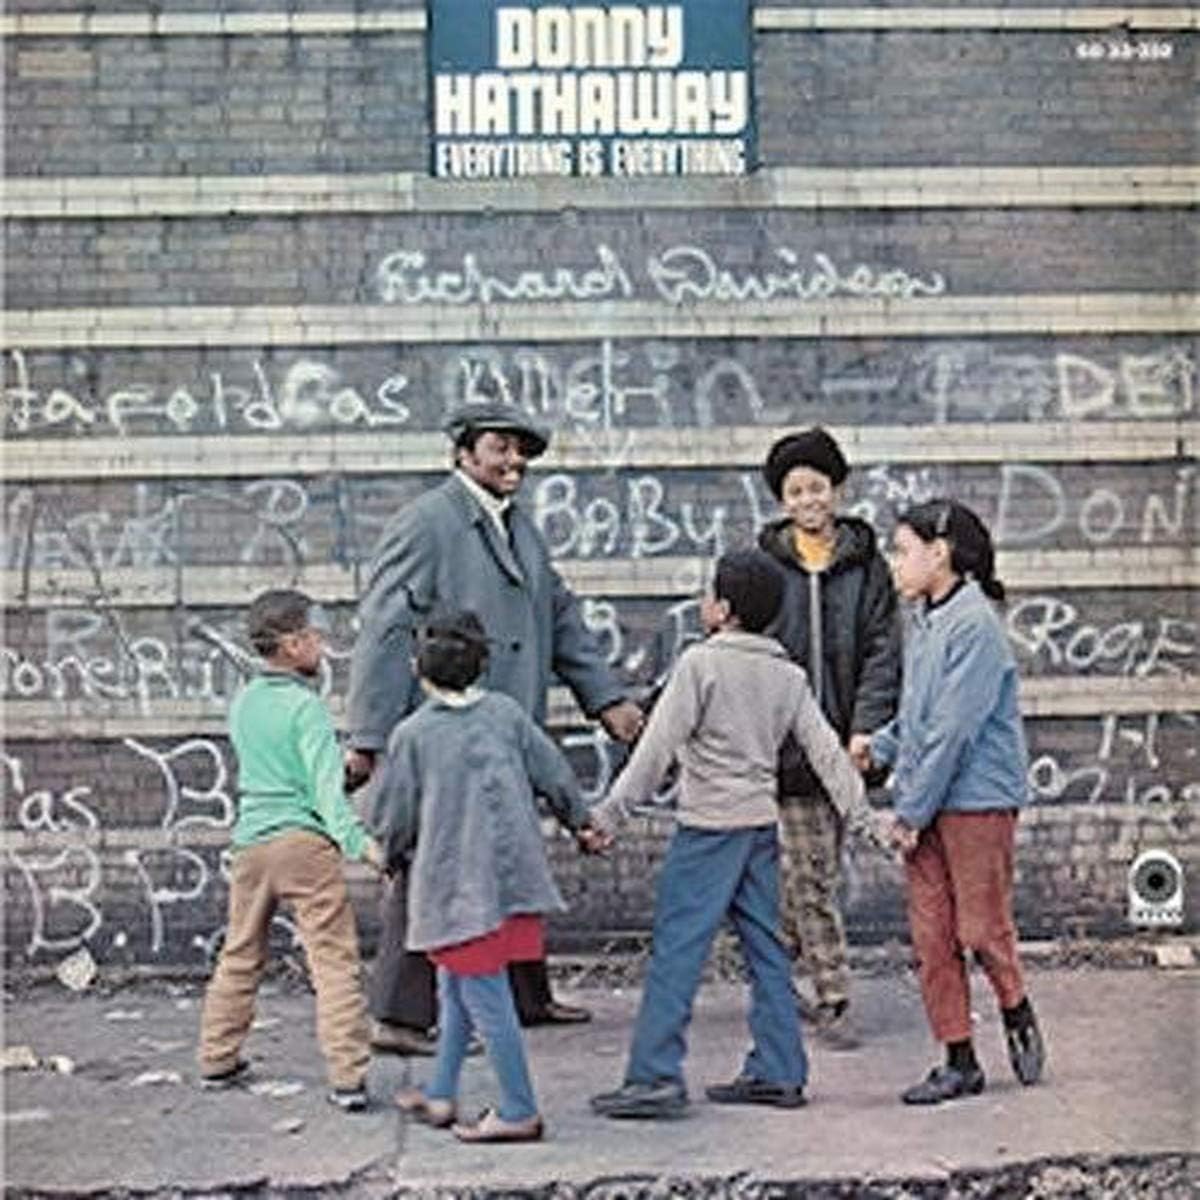 Donny Hathaway - Everything is everything (Vinile 180gr.)